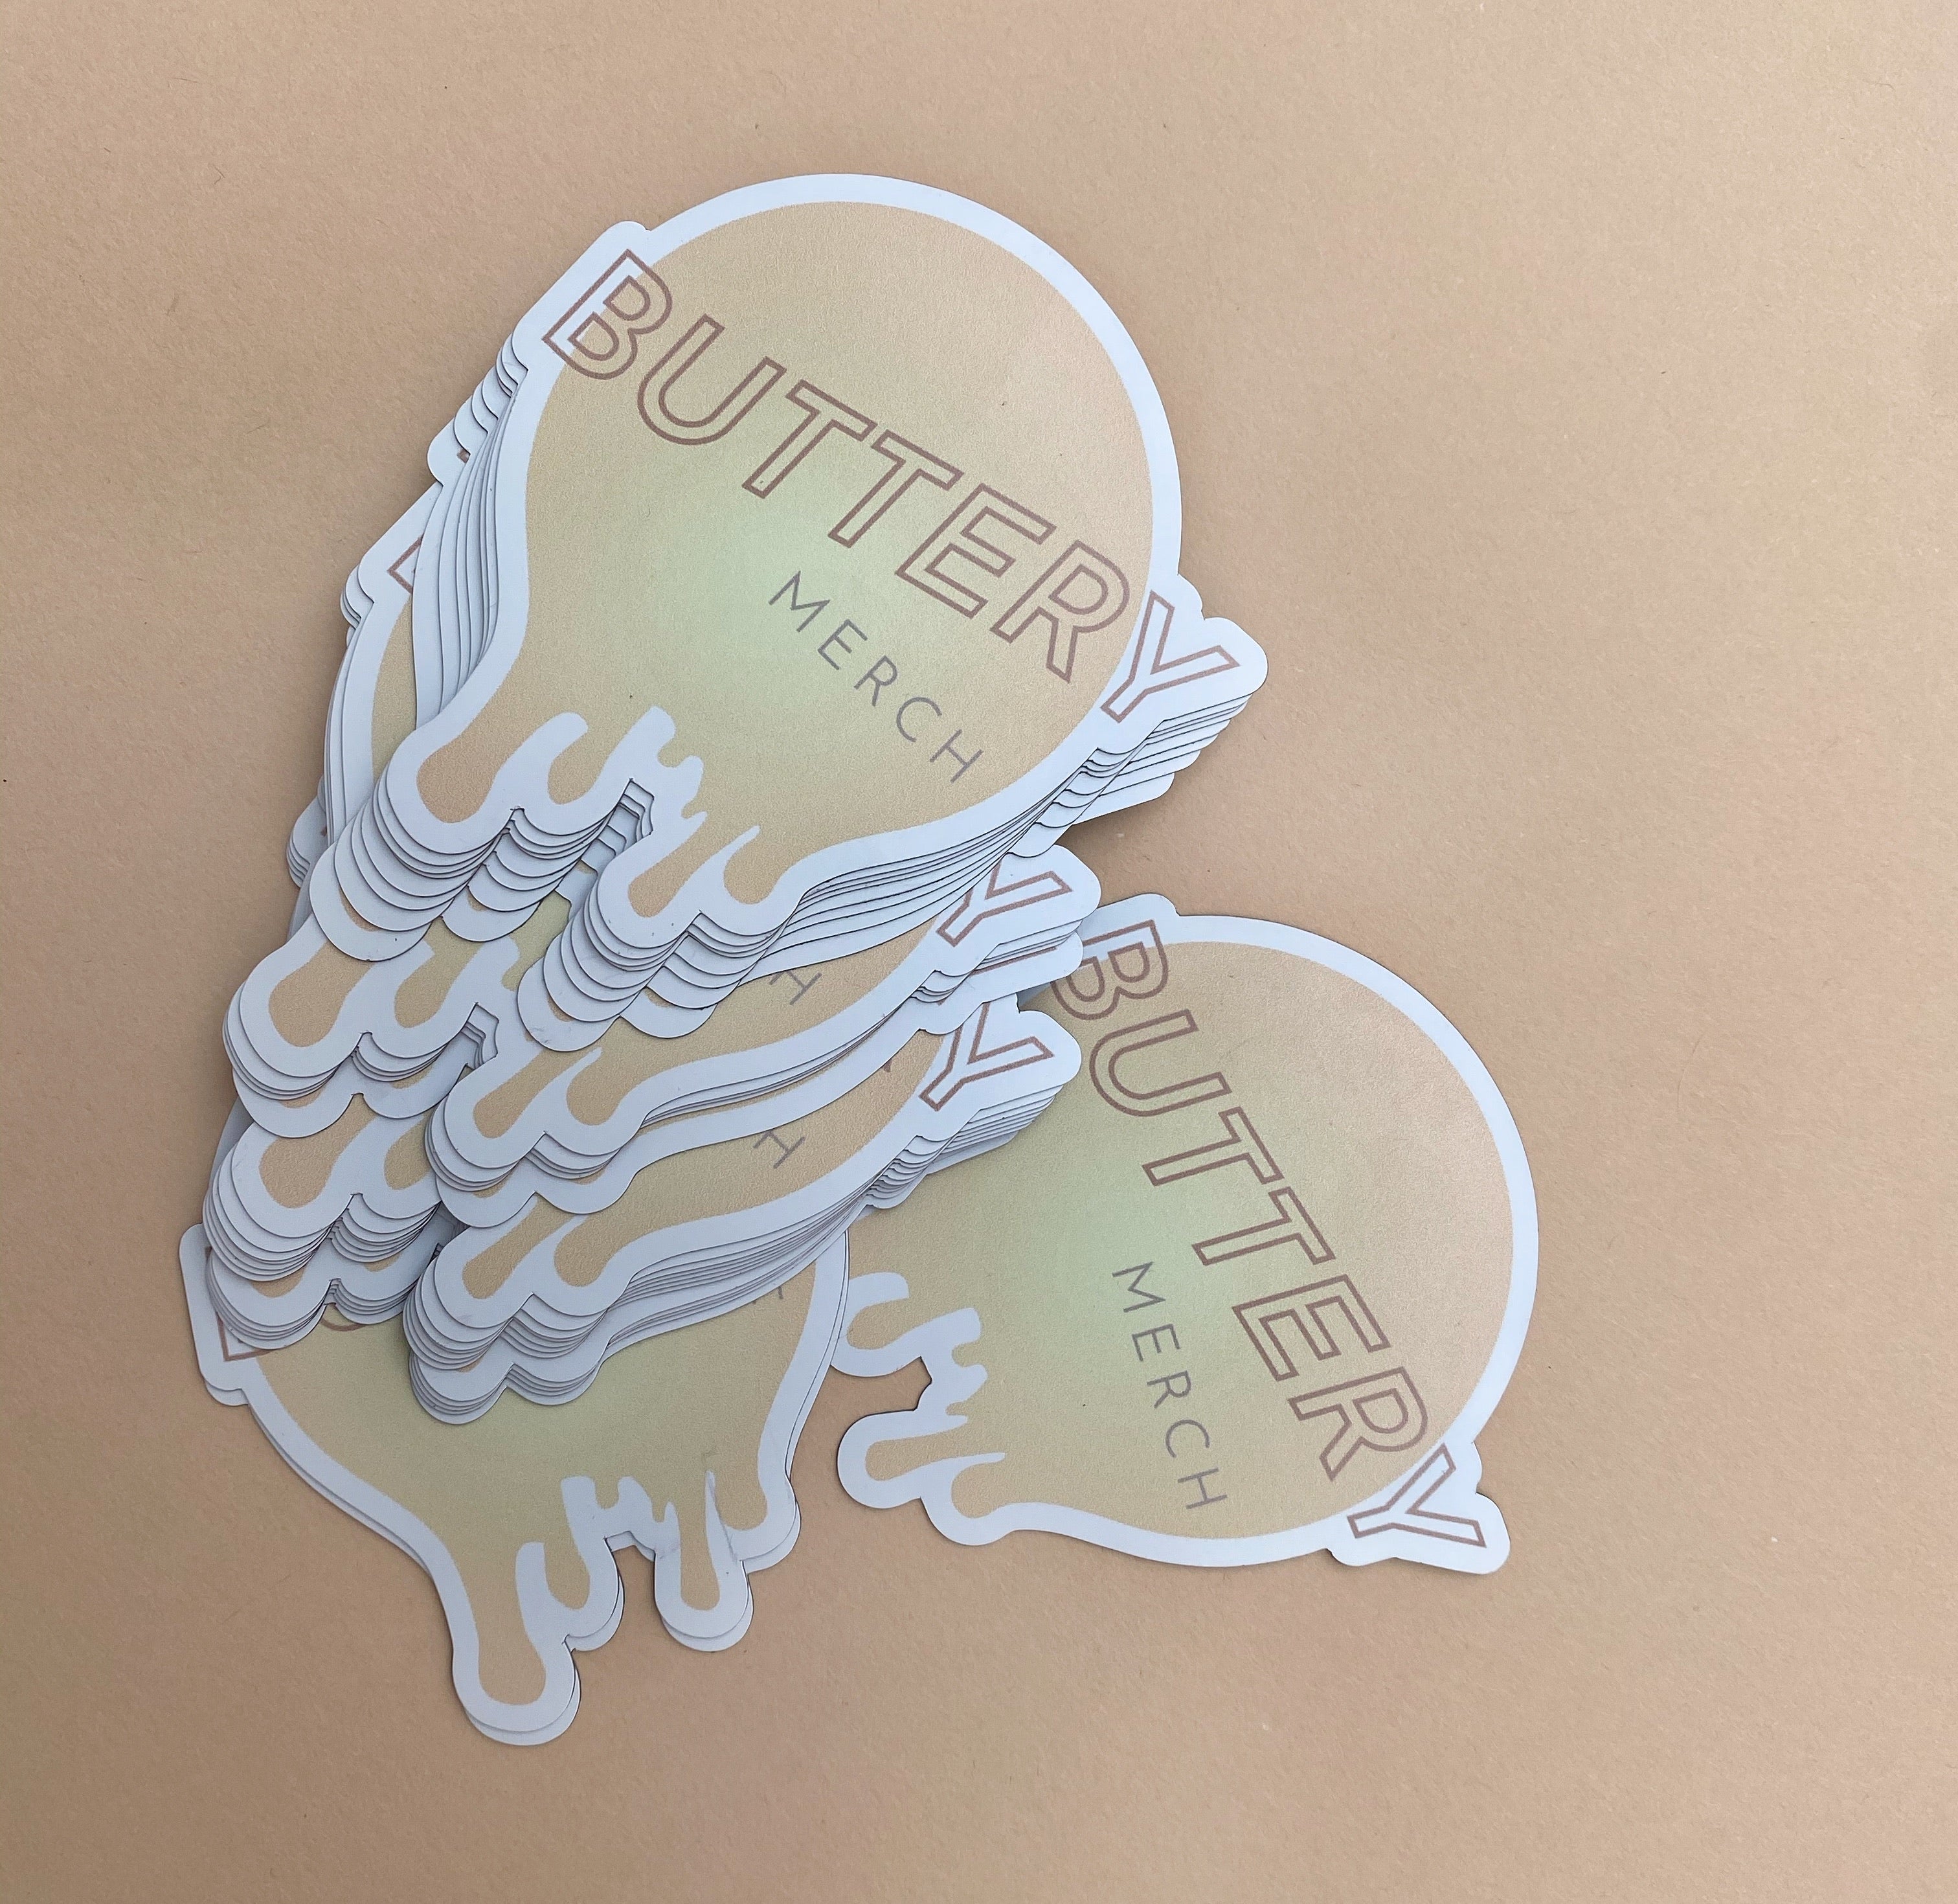 Buttery Logo Magnets